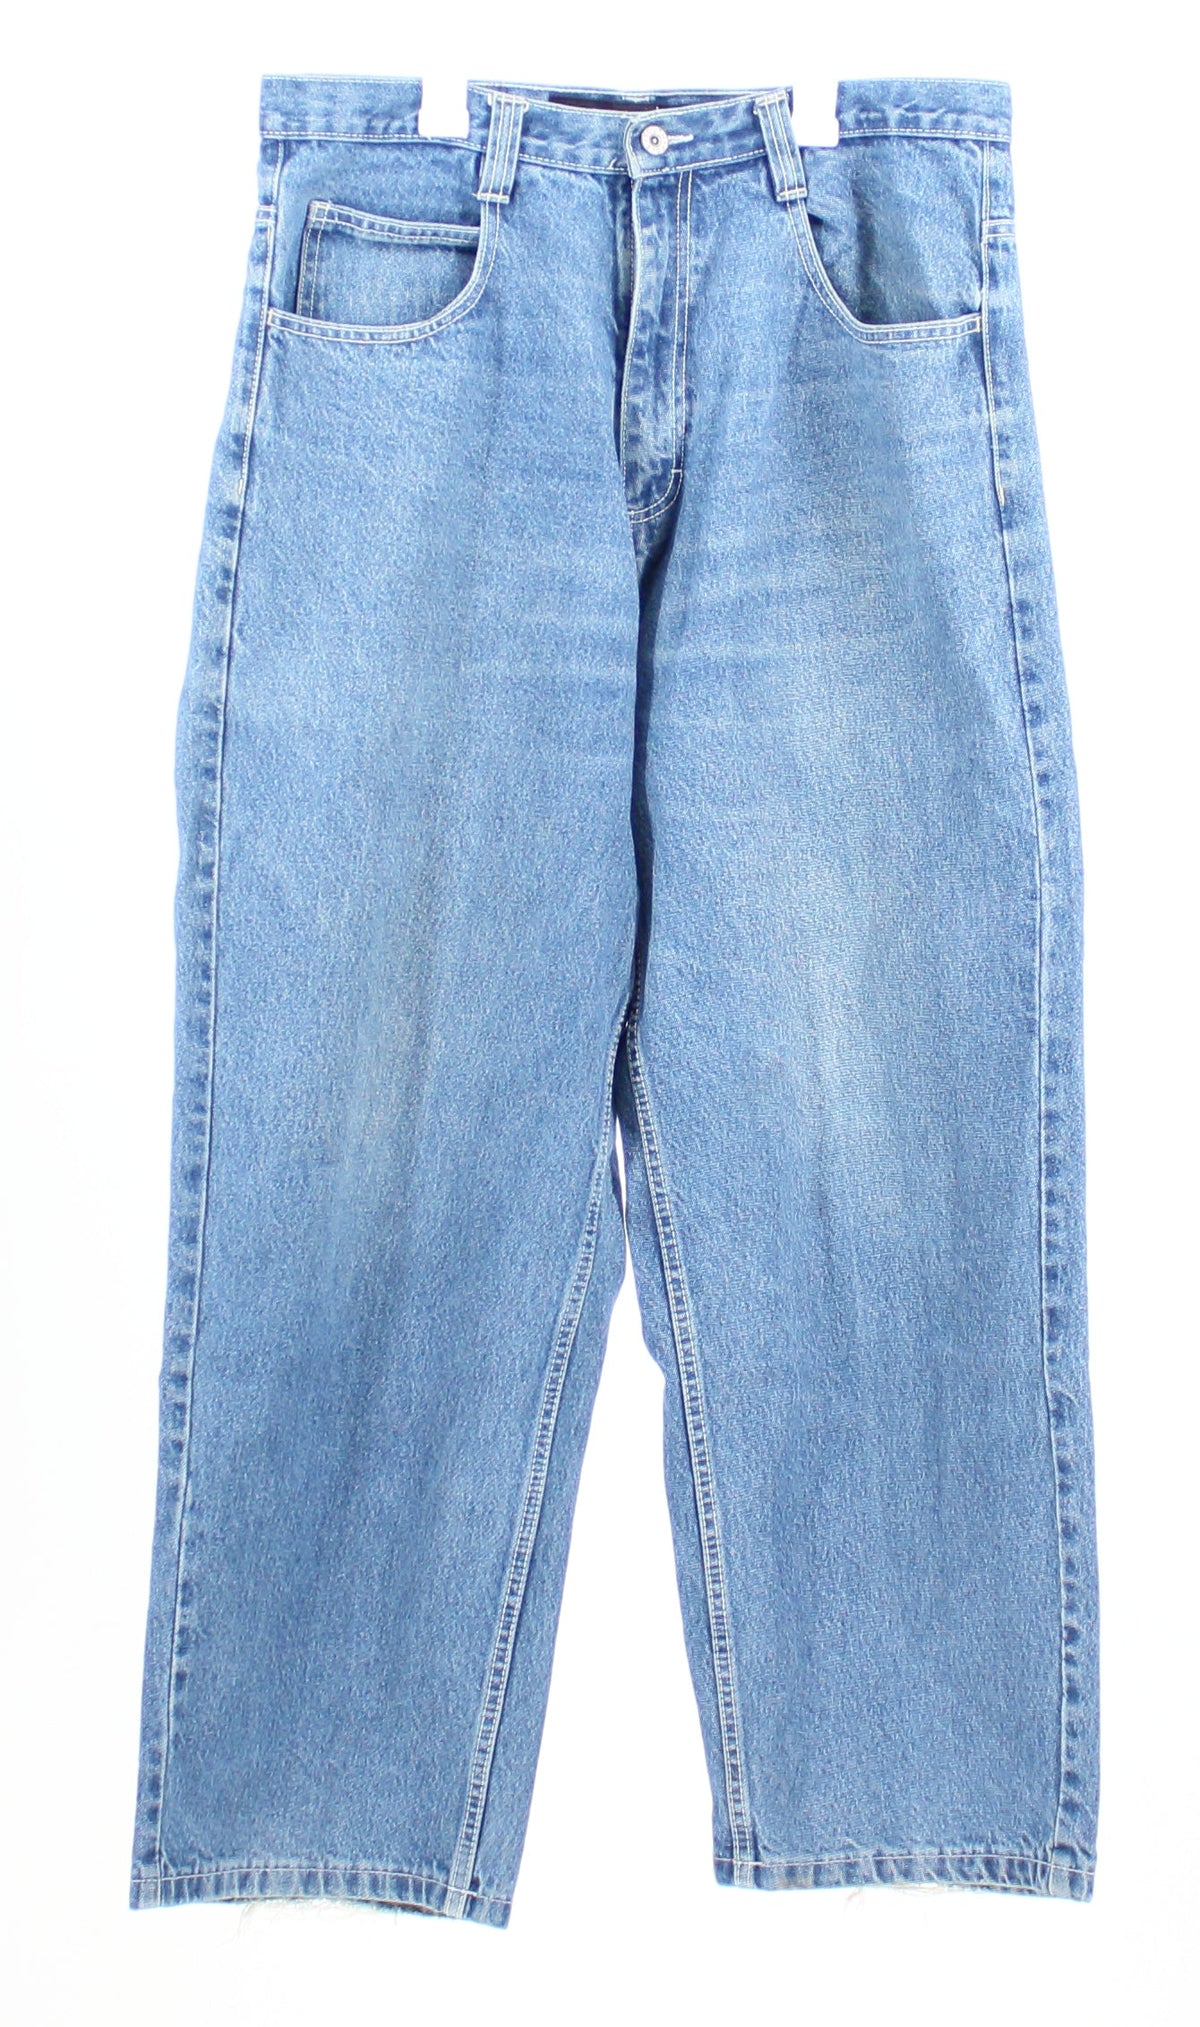 South Pole Medium Washed Realxed Fit Denim Jeans